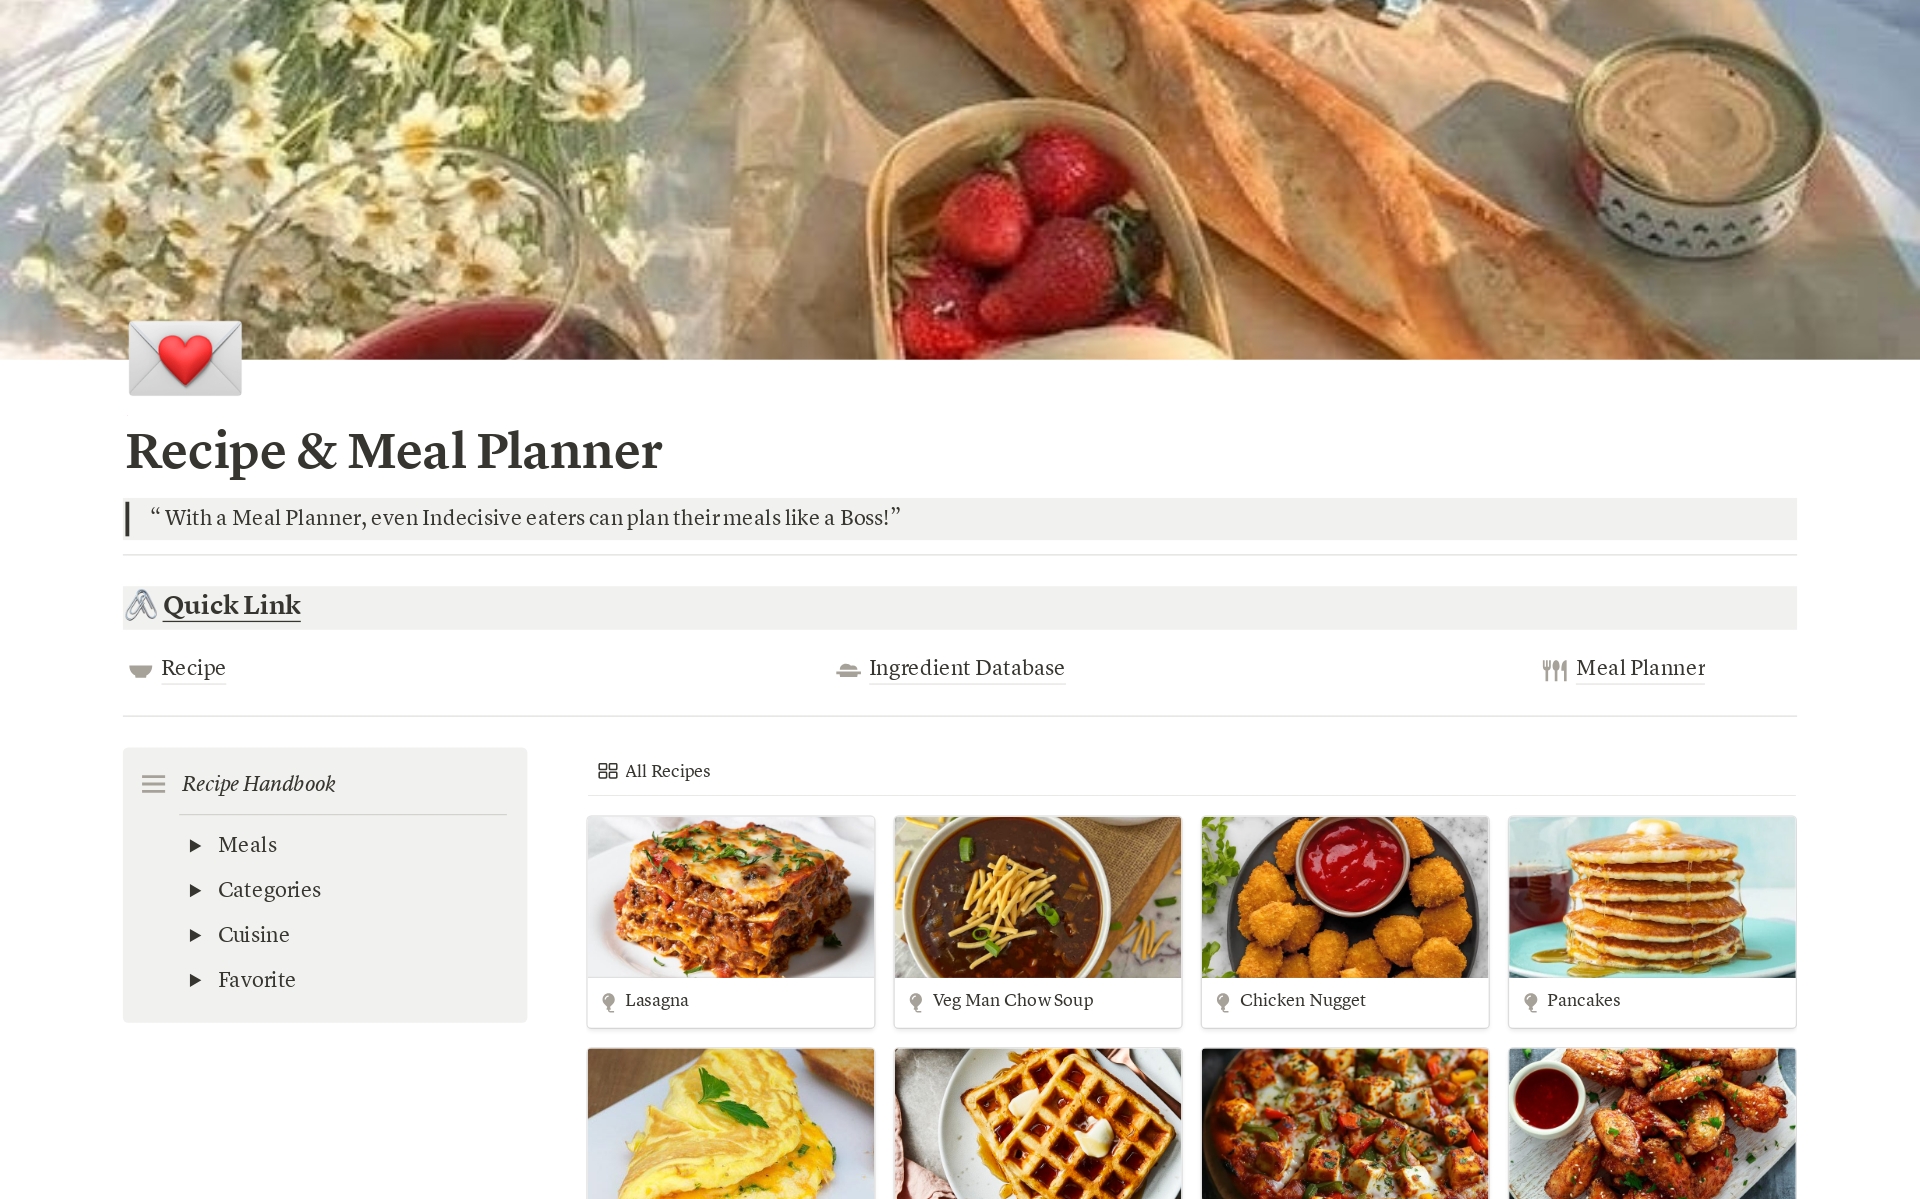 Transform your cooking routine and make meal planning a breeze with our Recipe and Meal Planner Notion Template. Get started today and enjoy the benefits of an organized, efficient, and enjoyable cooking experience!